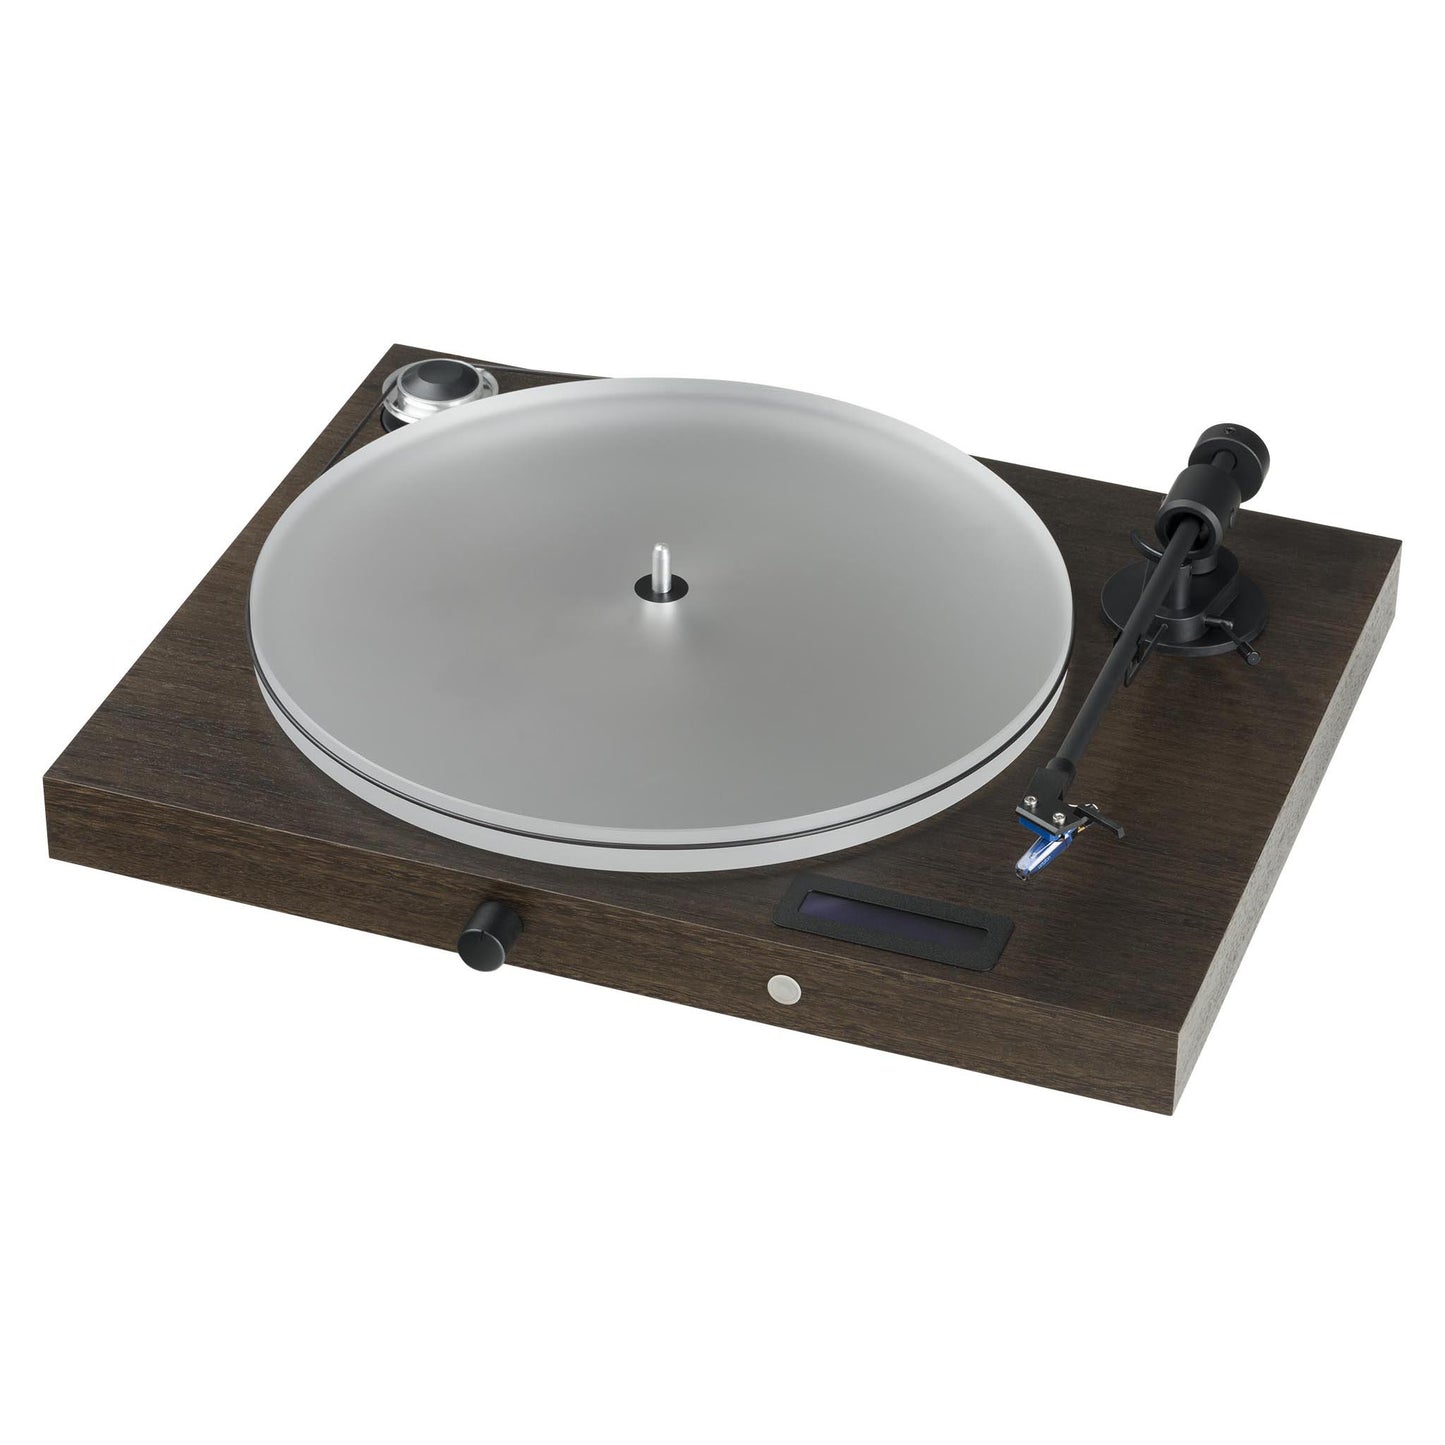 Pro-Ject Juke Box S2 "All-in-One" Turntable System